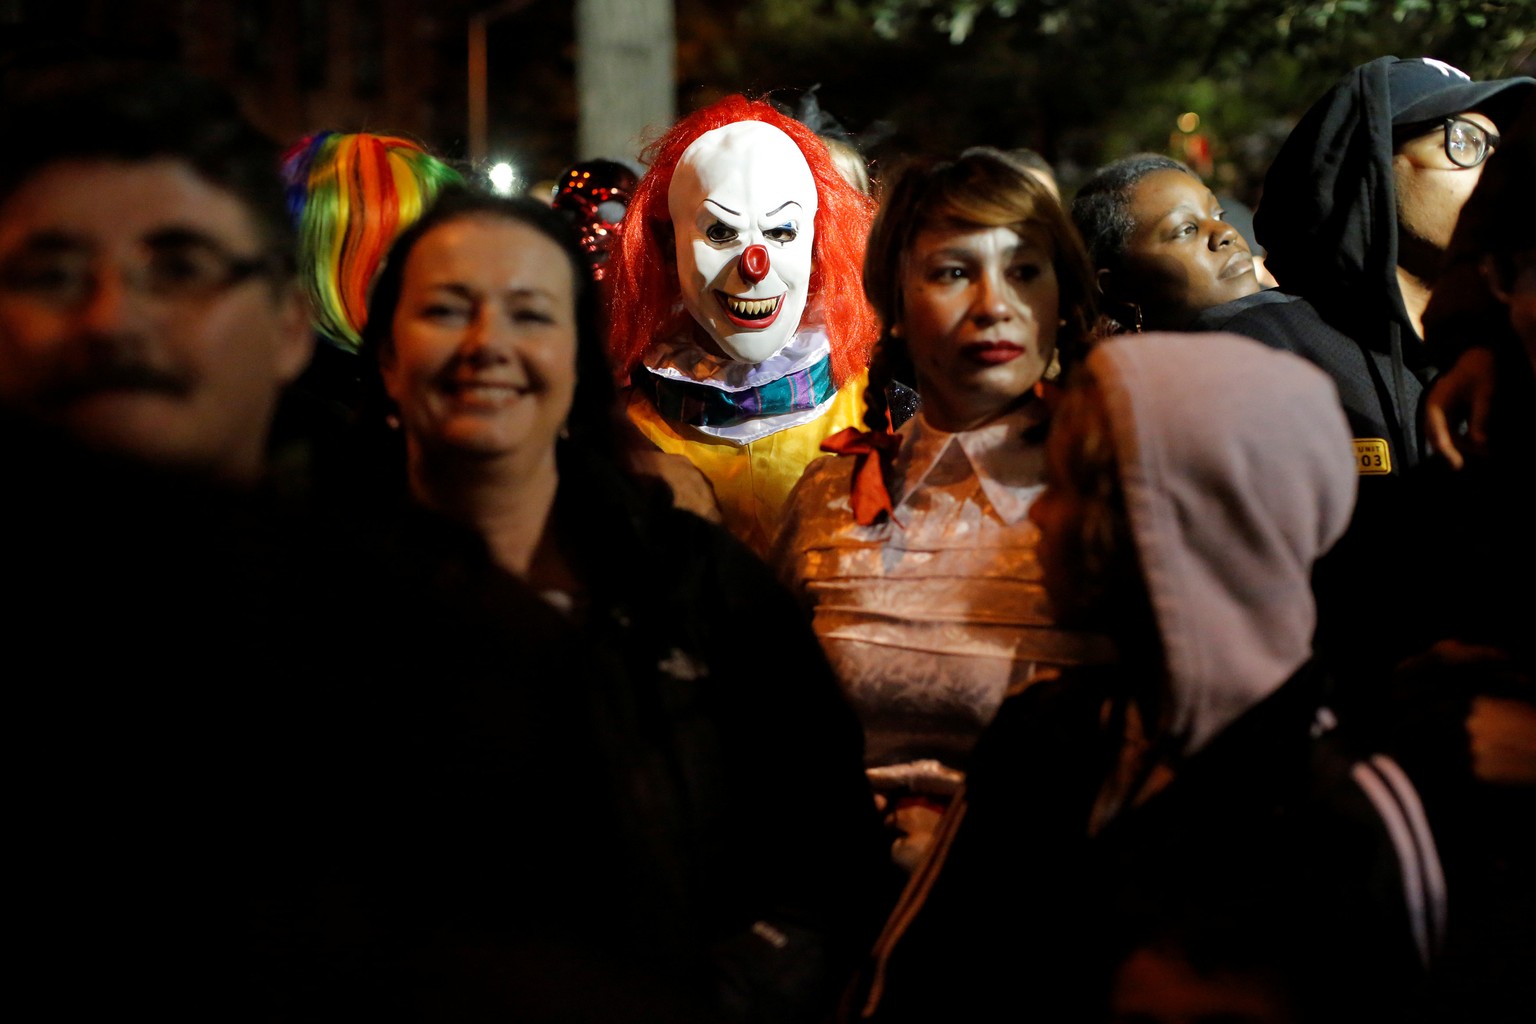 A person dressed in a clown costume stands amongst attendees during the Greenwich Village Halloween Parade in Manhattan, New York, U.S., October 31, 2016. REUTERS/Andrew Kelly